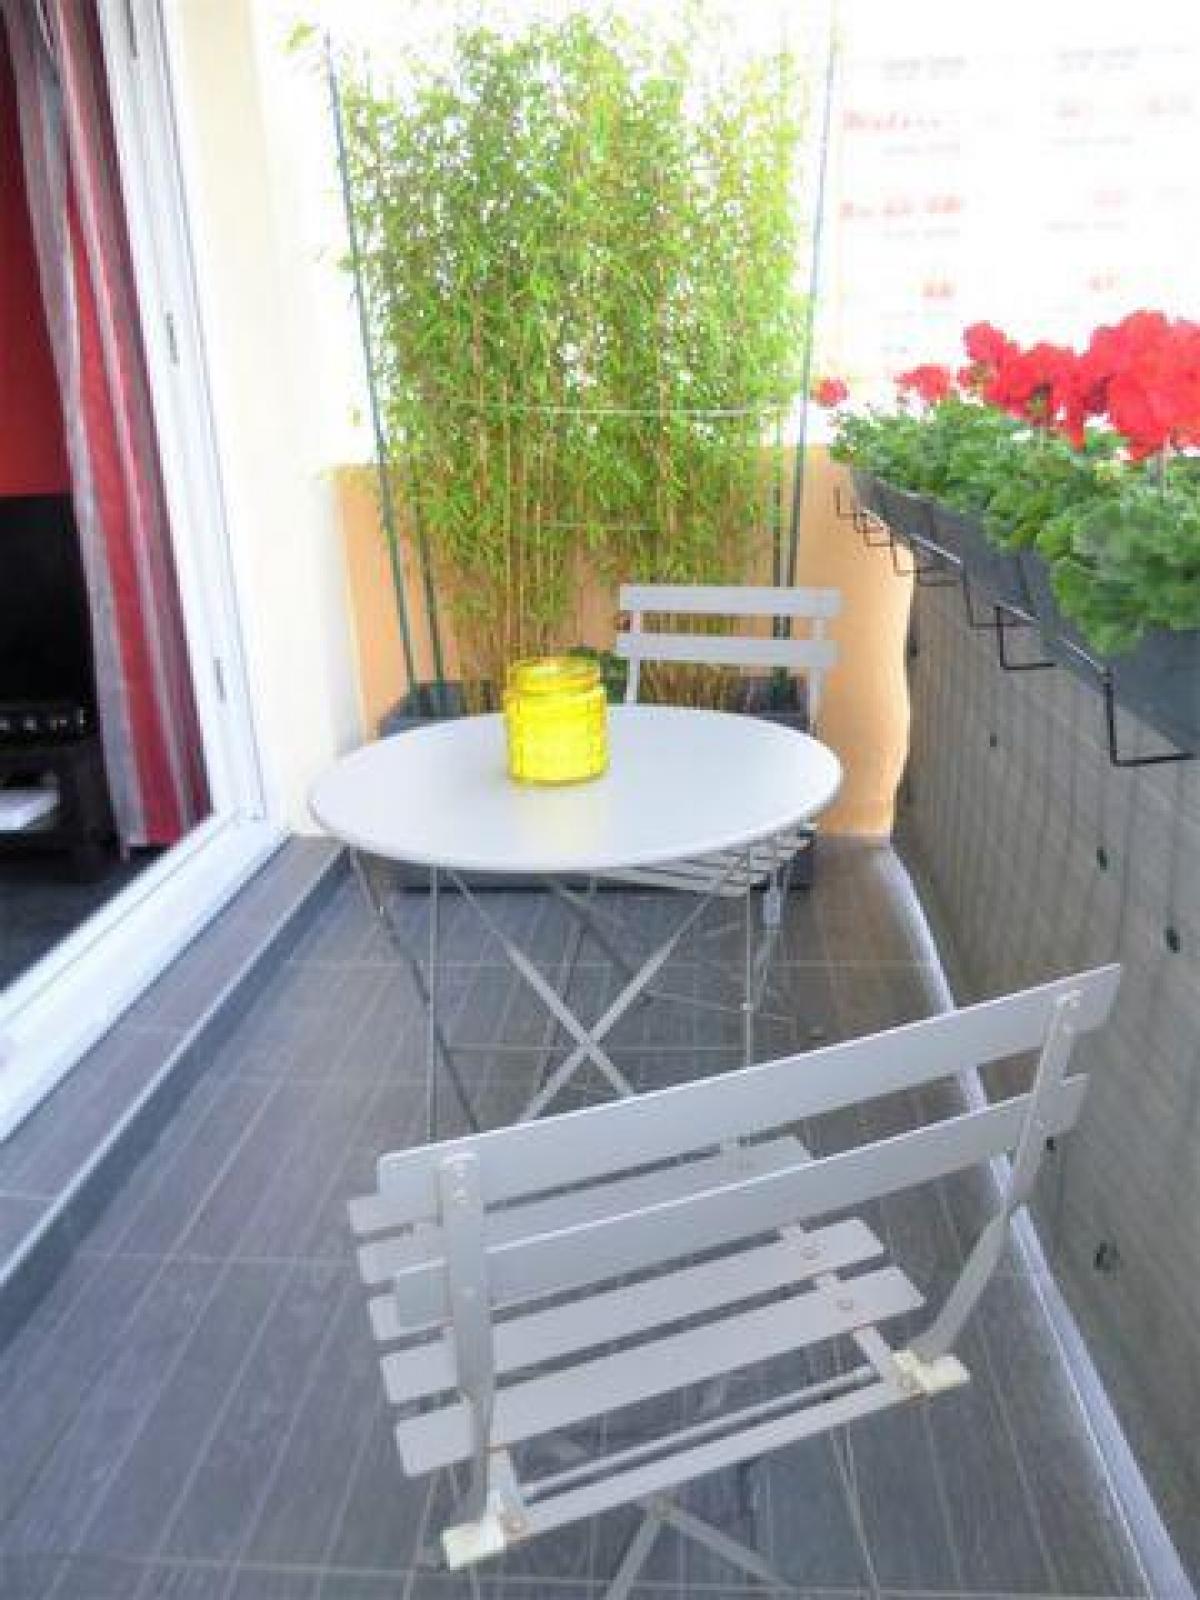 Picture of Apartment For Sale in Lorient, Bretagne, France